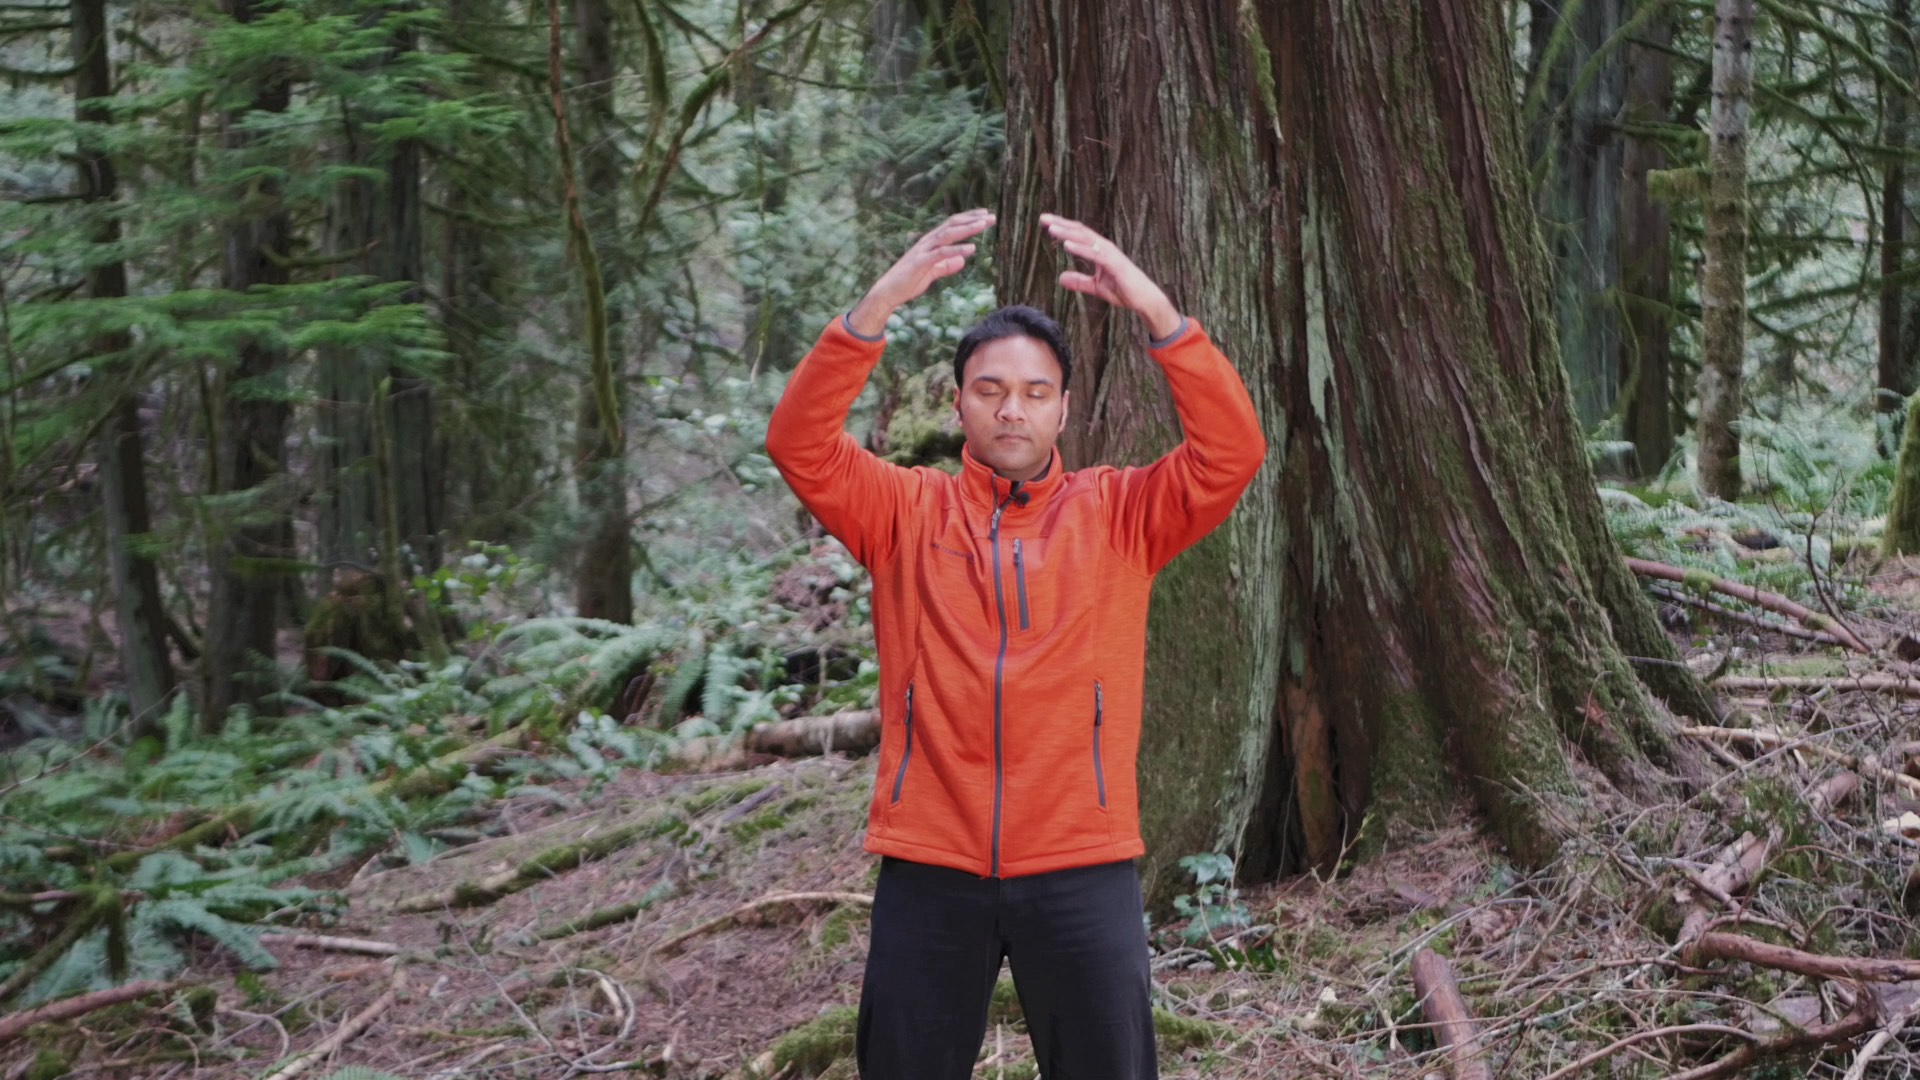 qigong practice demonstration in a forest